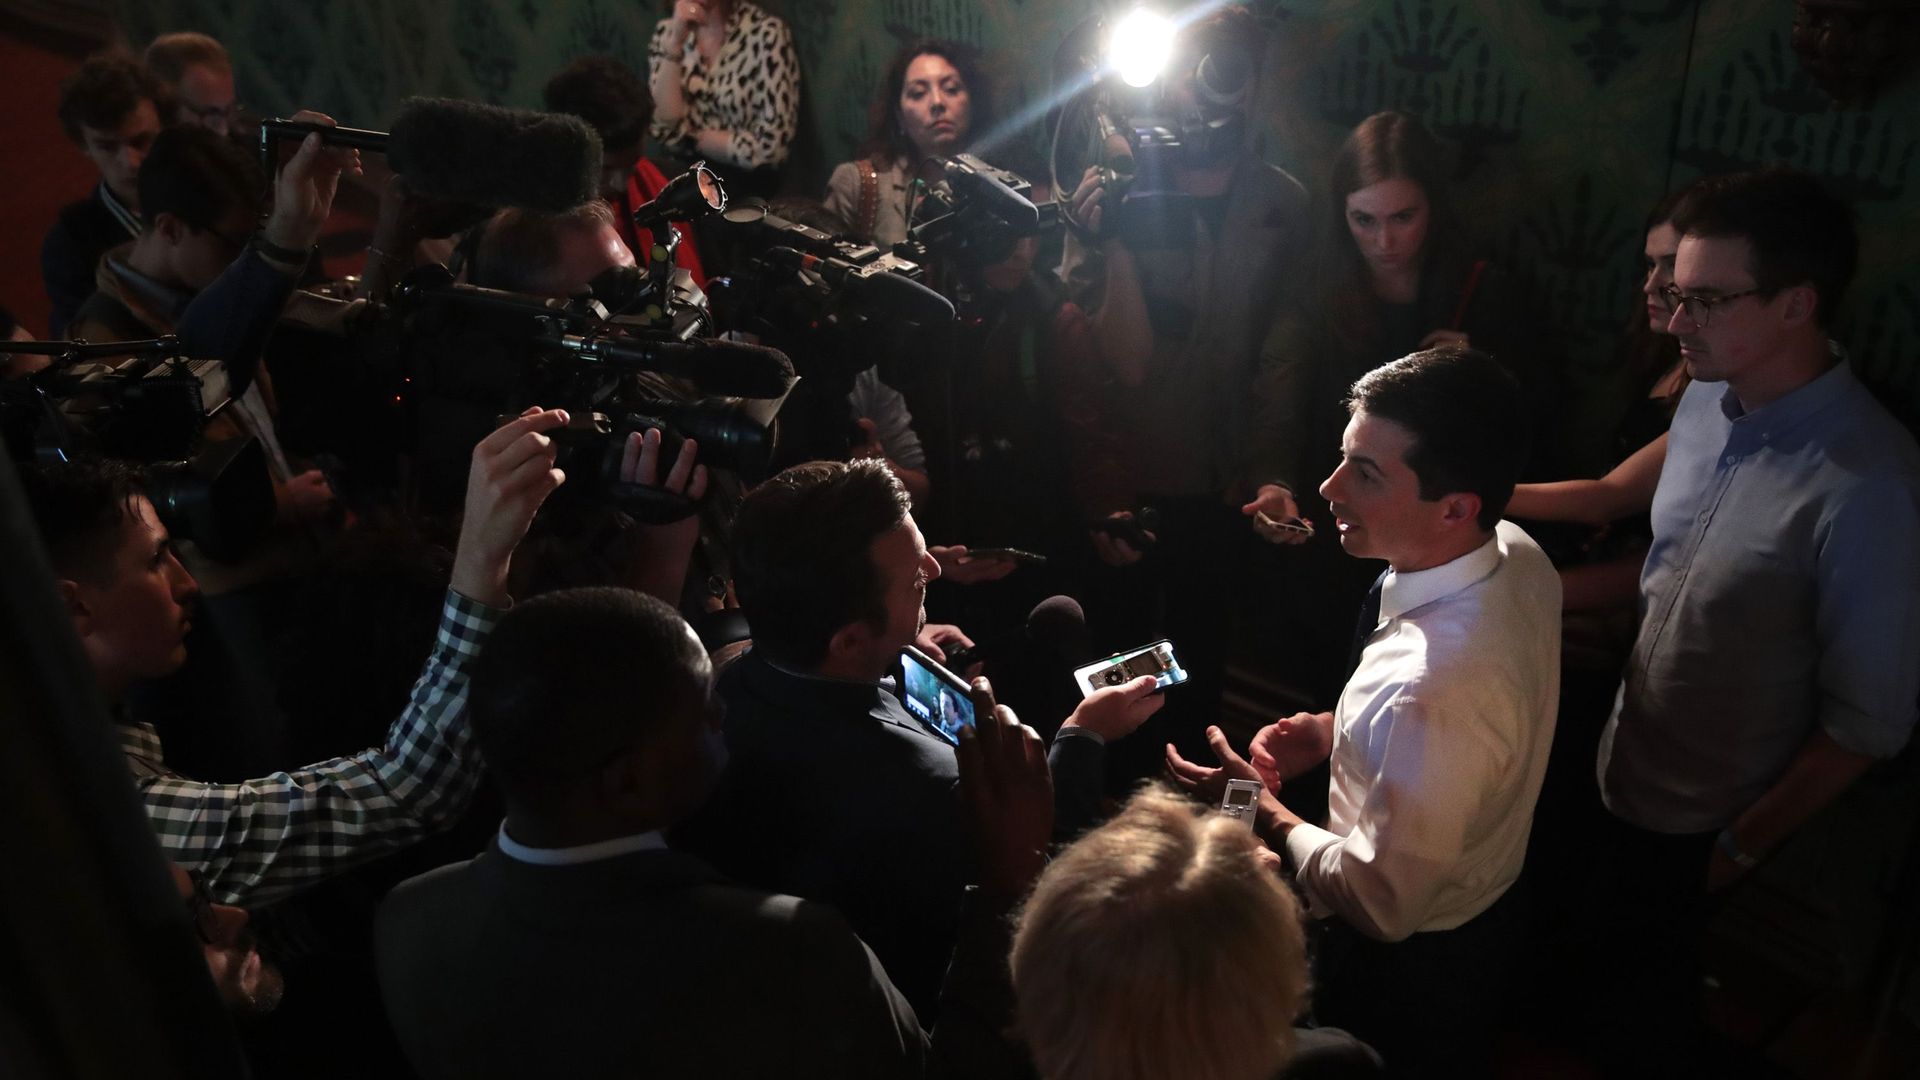 Pete Buttigieg fields questions after speaking at the University of Chicago on Oct. 18.